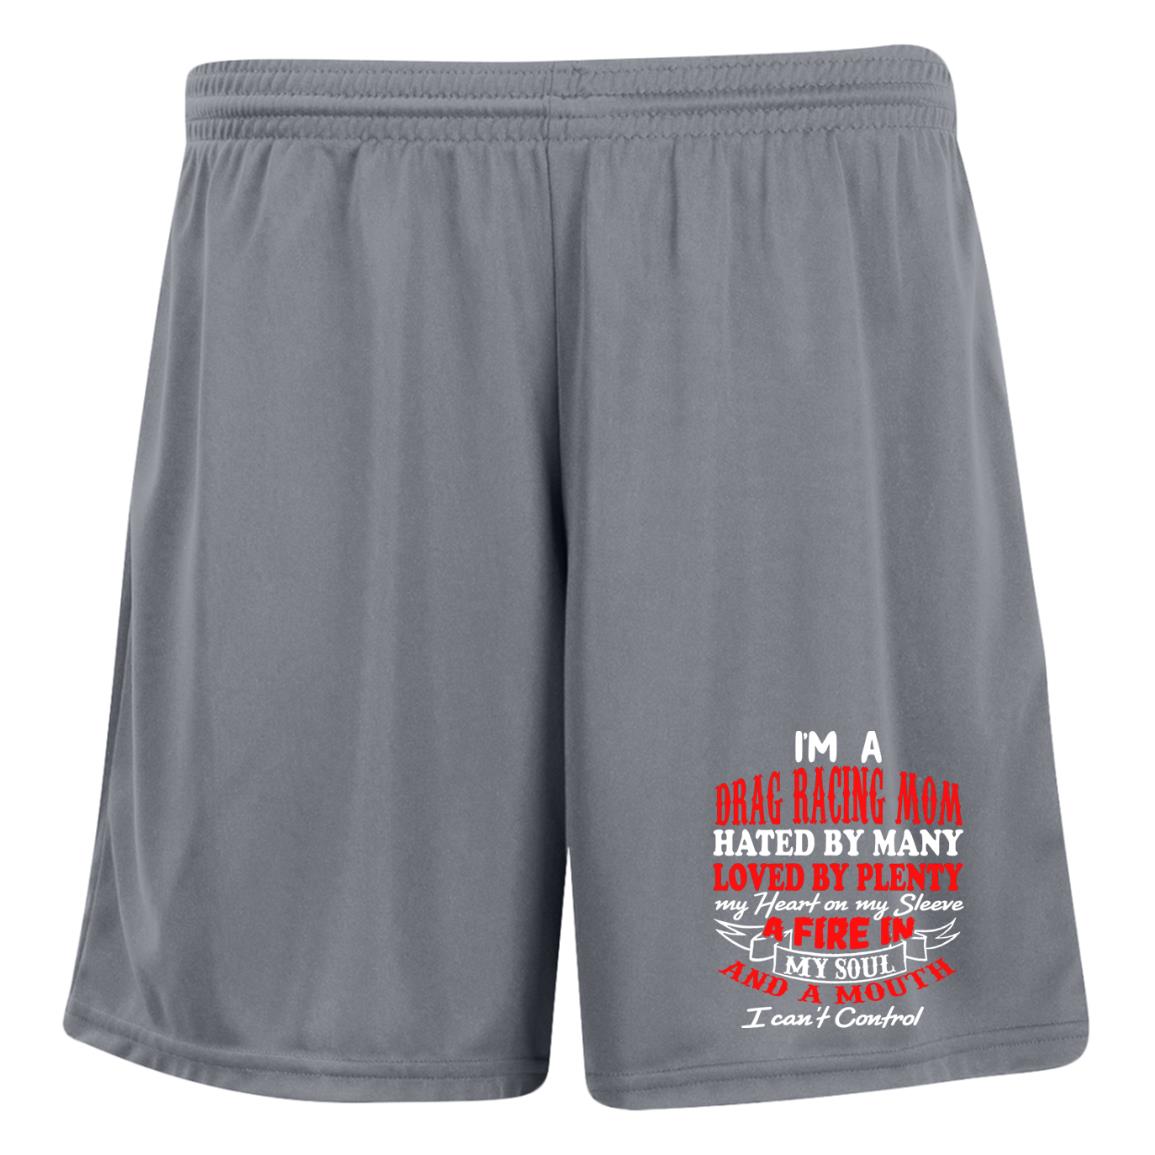 I'm A Drag Racing Mom Hated By Many Loved By Plenty Ladies' Moisture-Wicking 7 inch Inseam Training Shorts